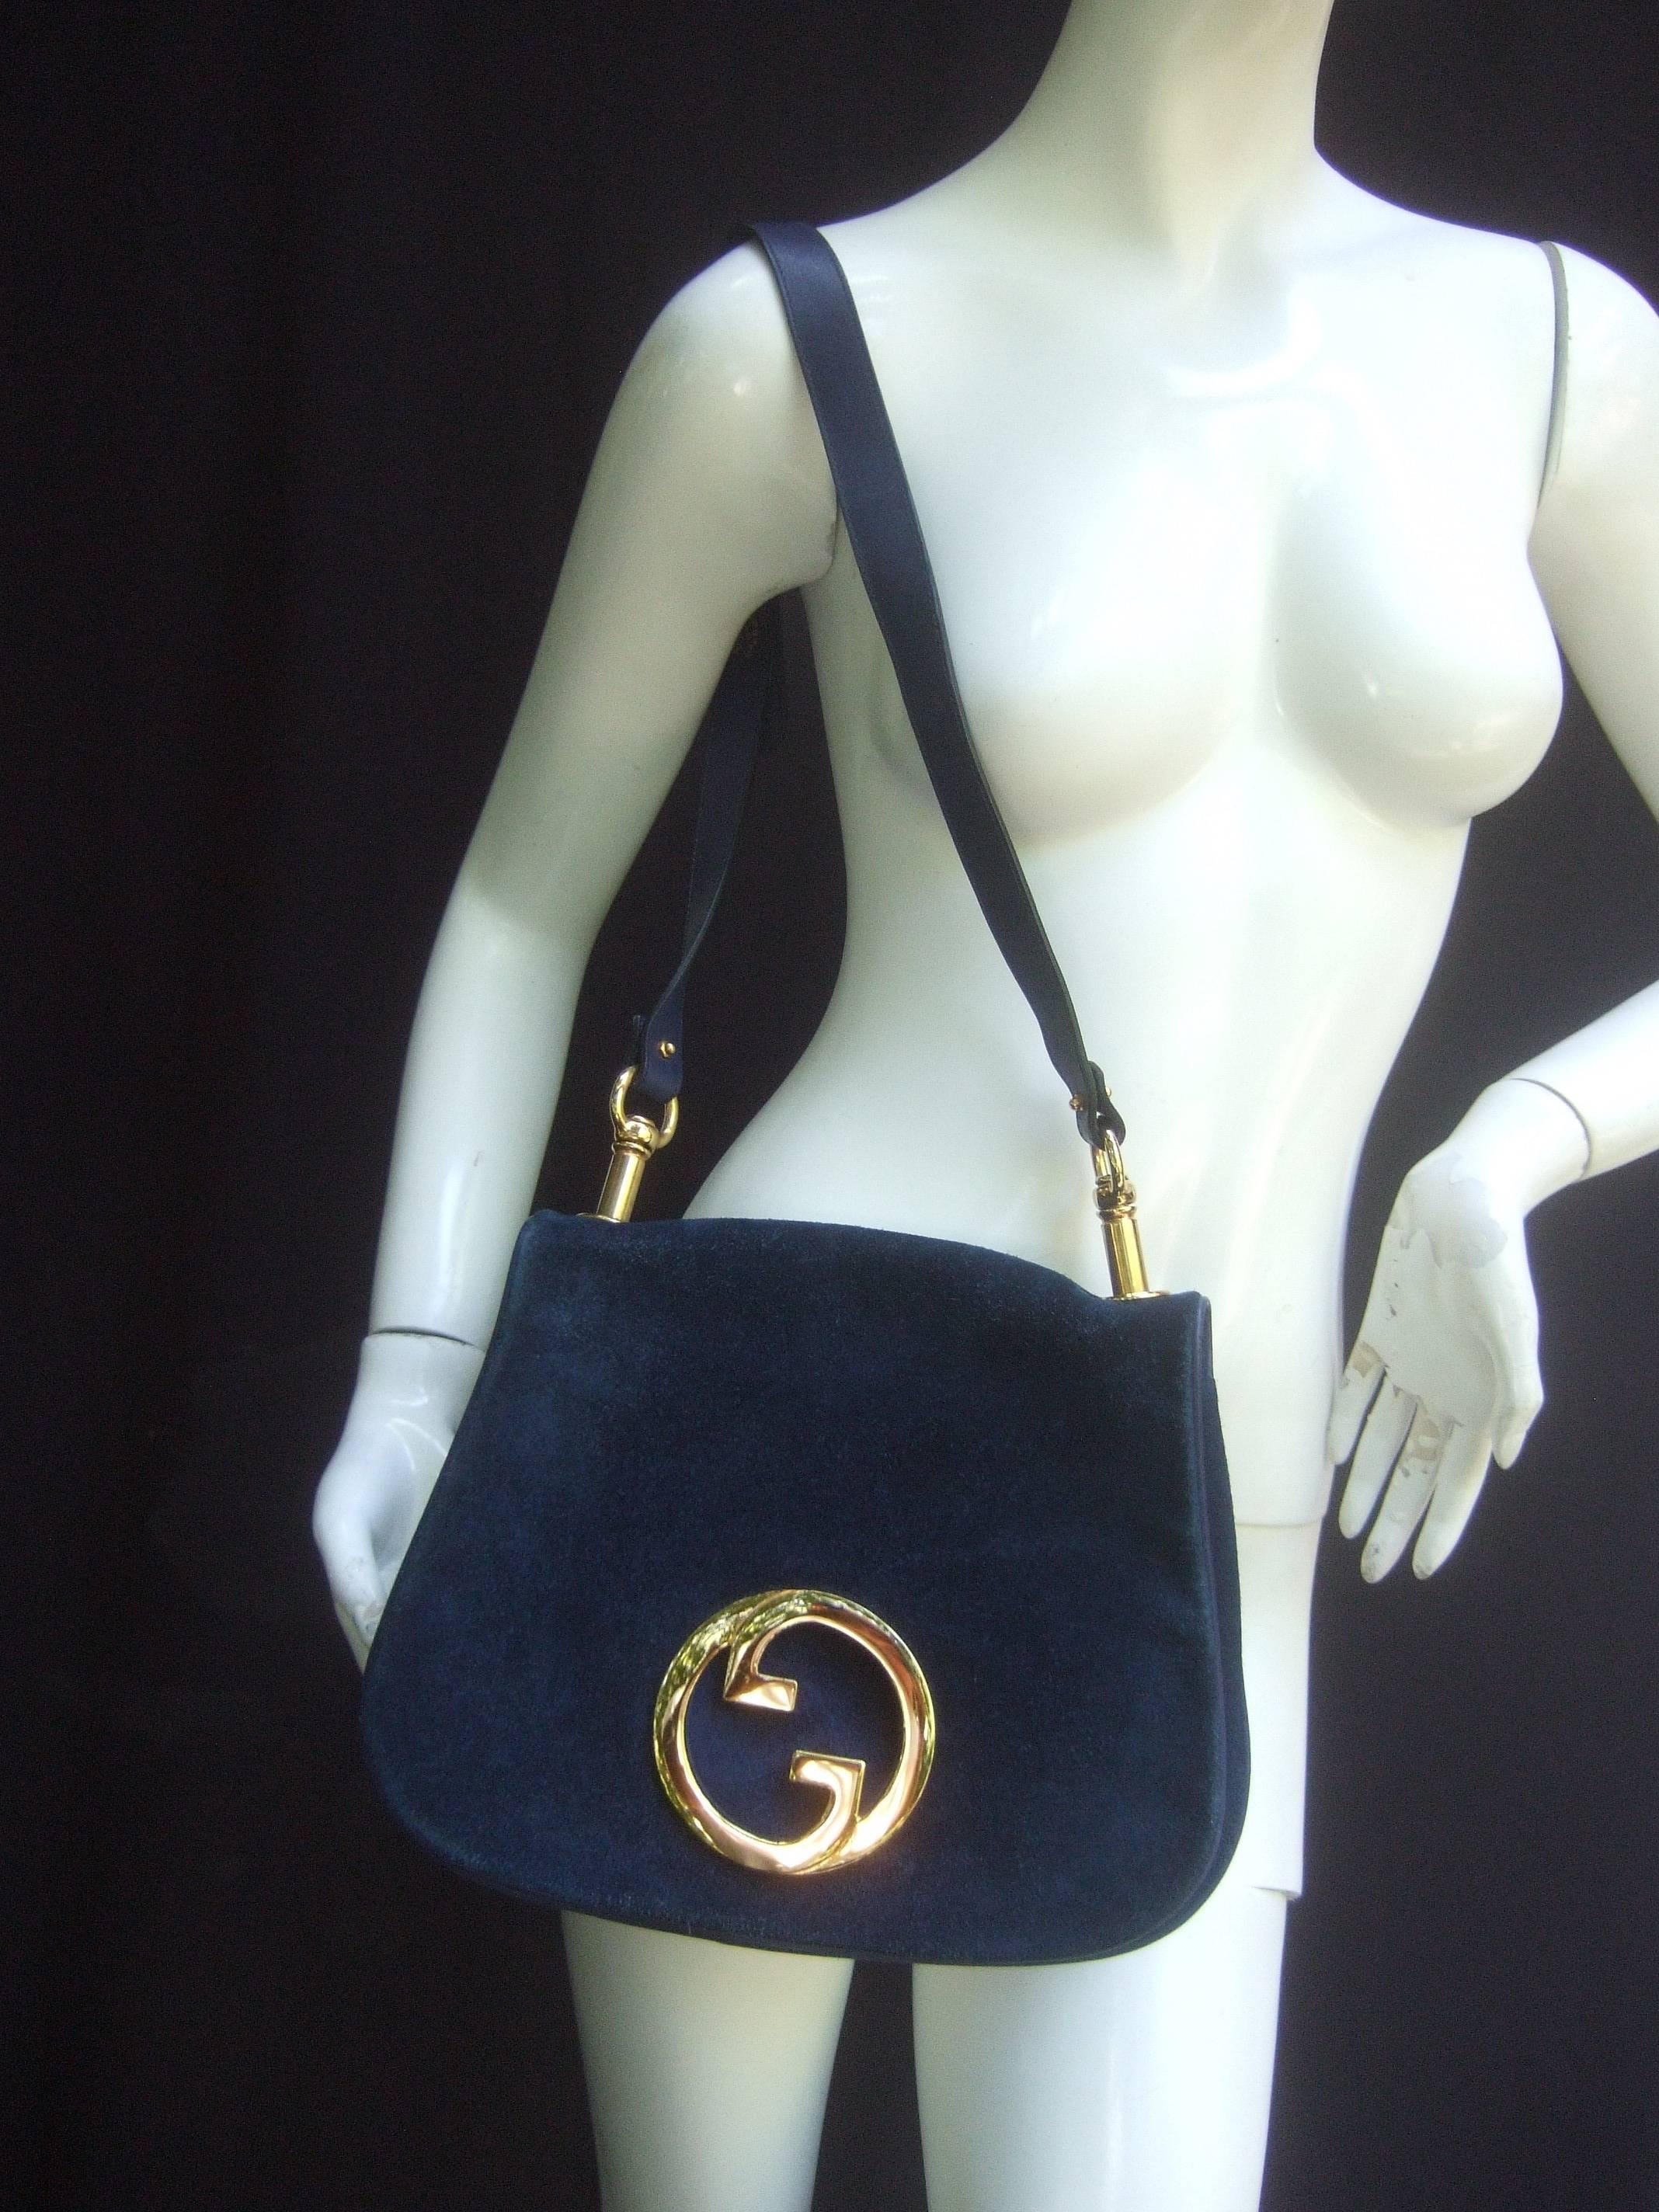 Gucci Italy Rare Midnight Blue Suede Shoulder Bag c 1970s 1